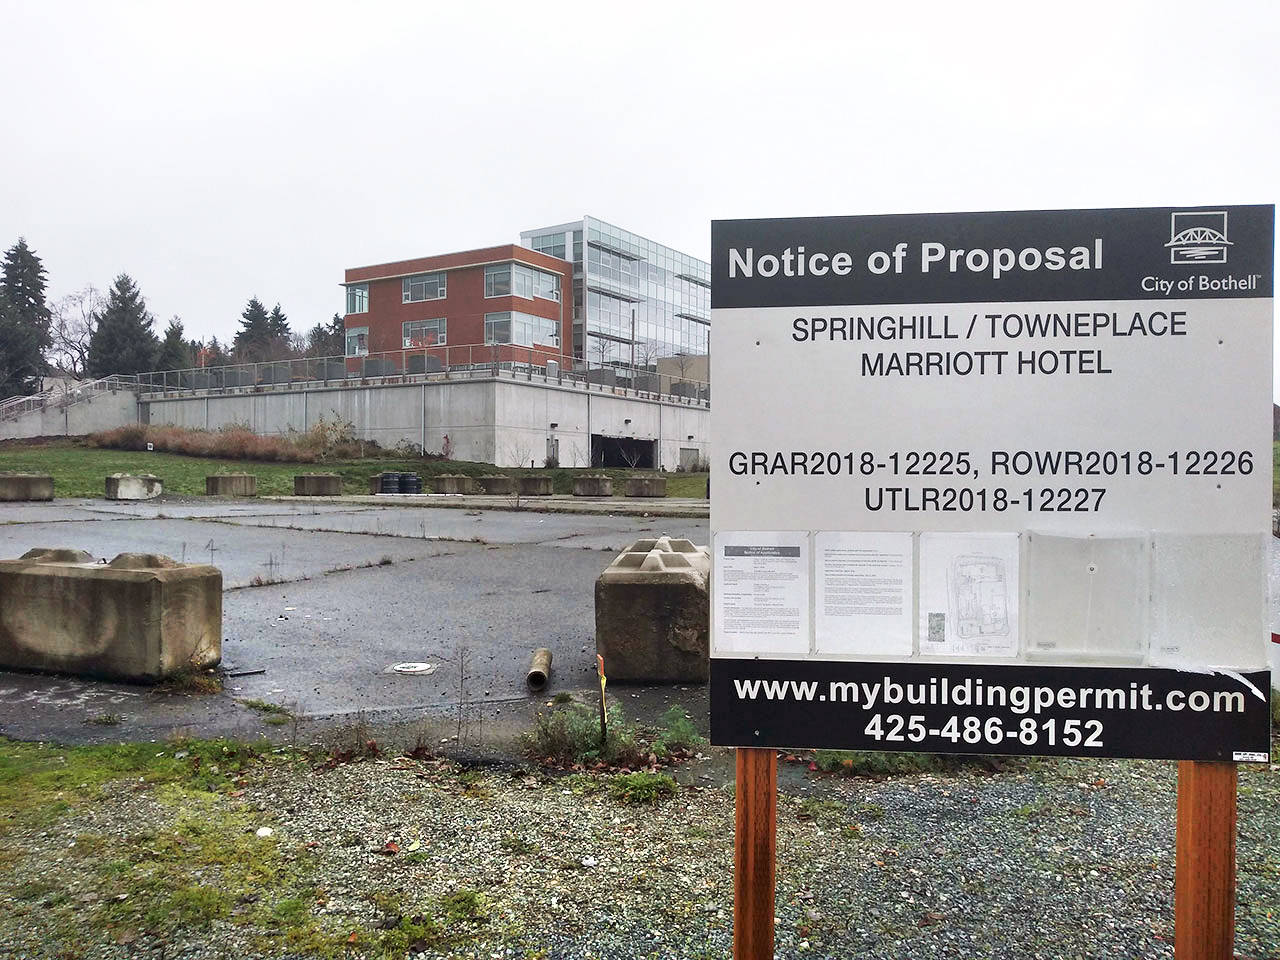 The city of Bothell has repurchased four parcels of land adjacent to city hall from 360 Hotel Group after they failed to begin construction on two hotels in June. (Aaron Kunkler /Bothell-Kenmore Reporter)